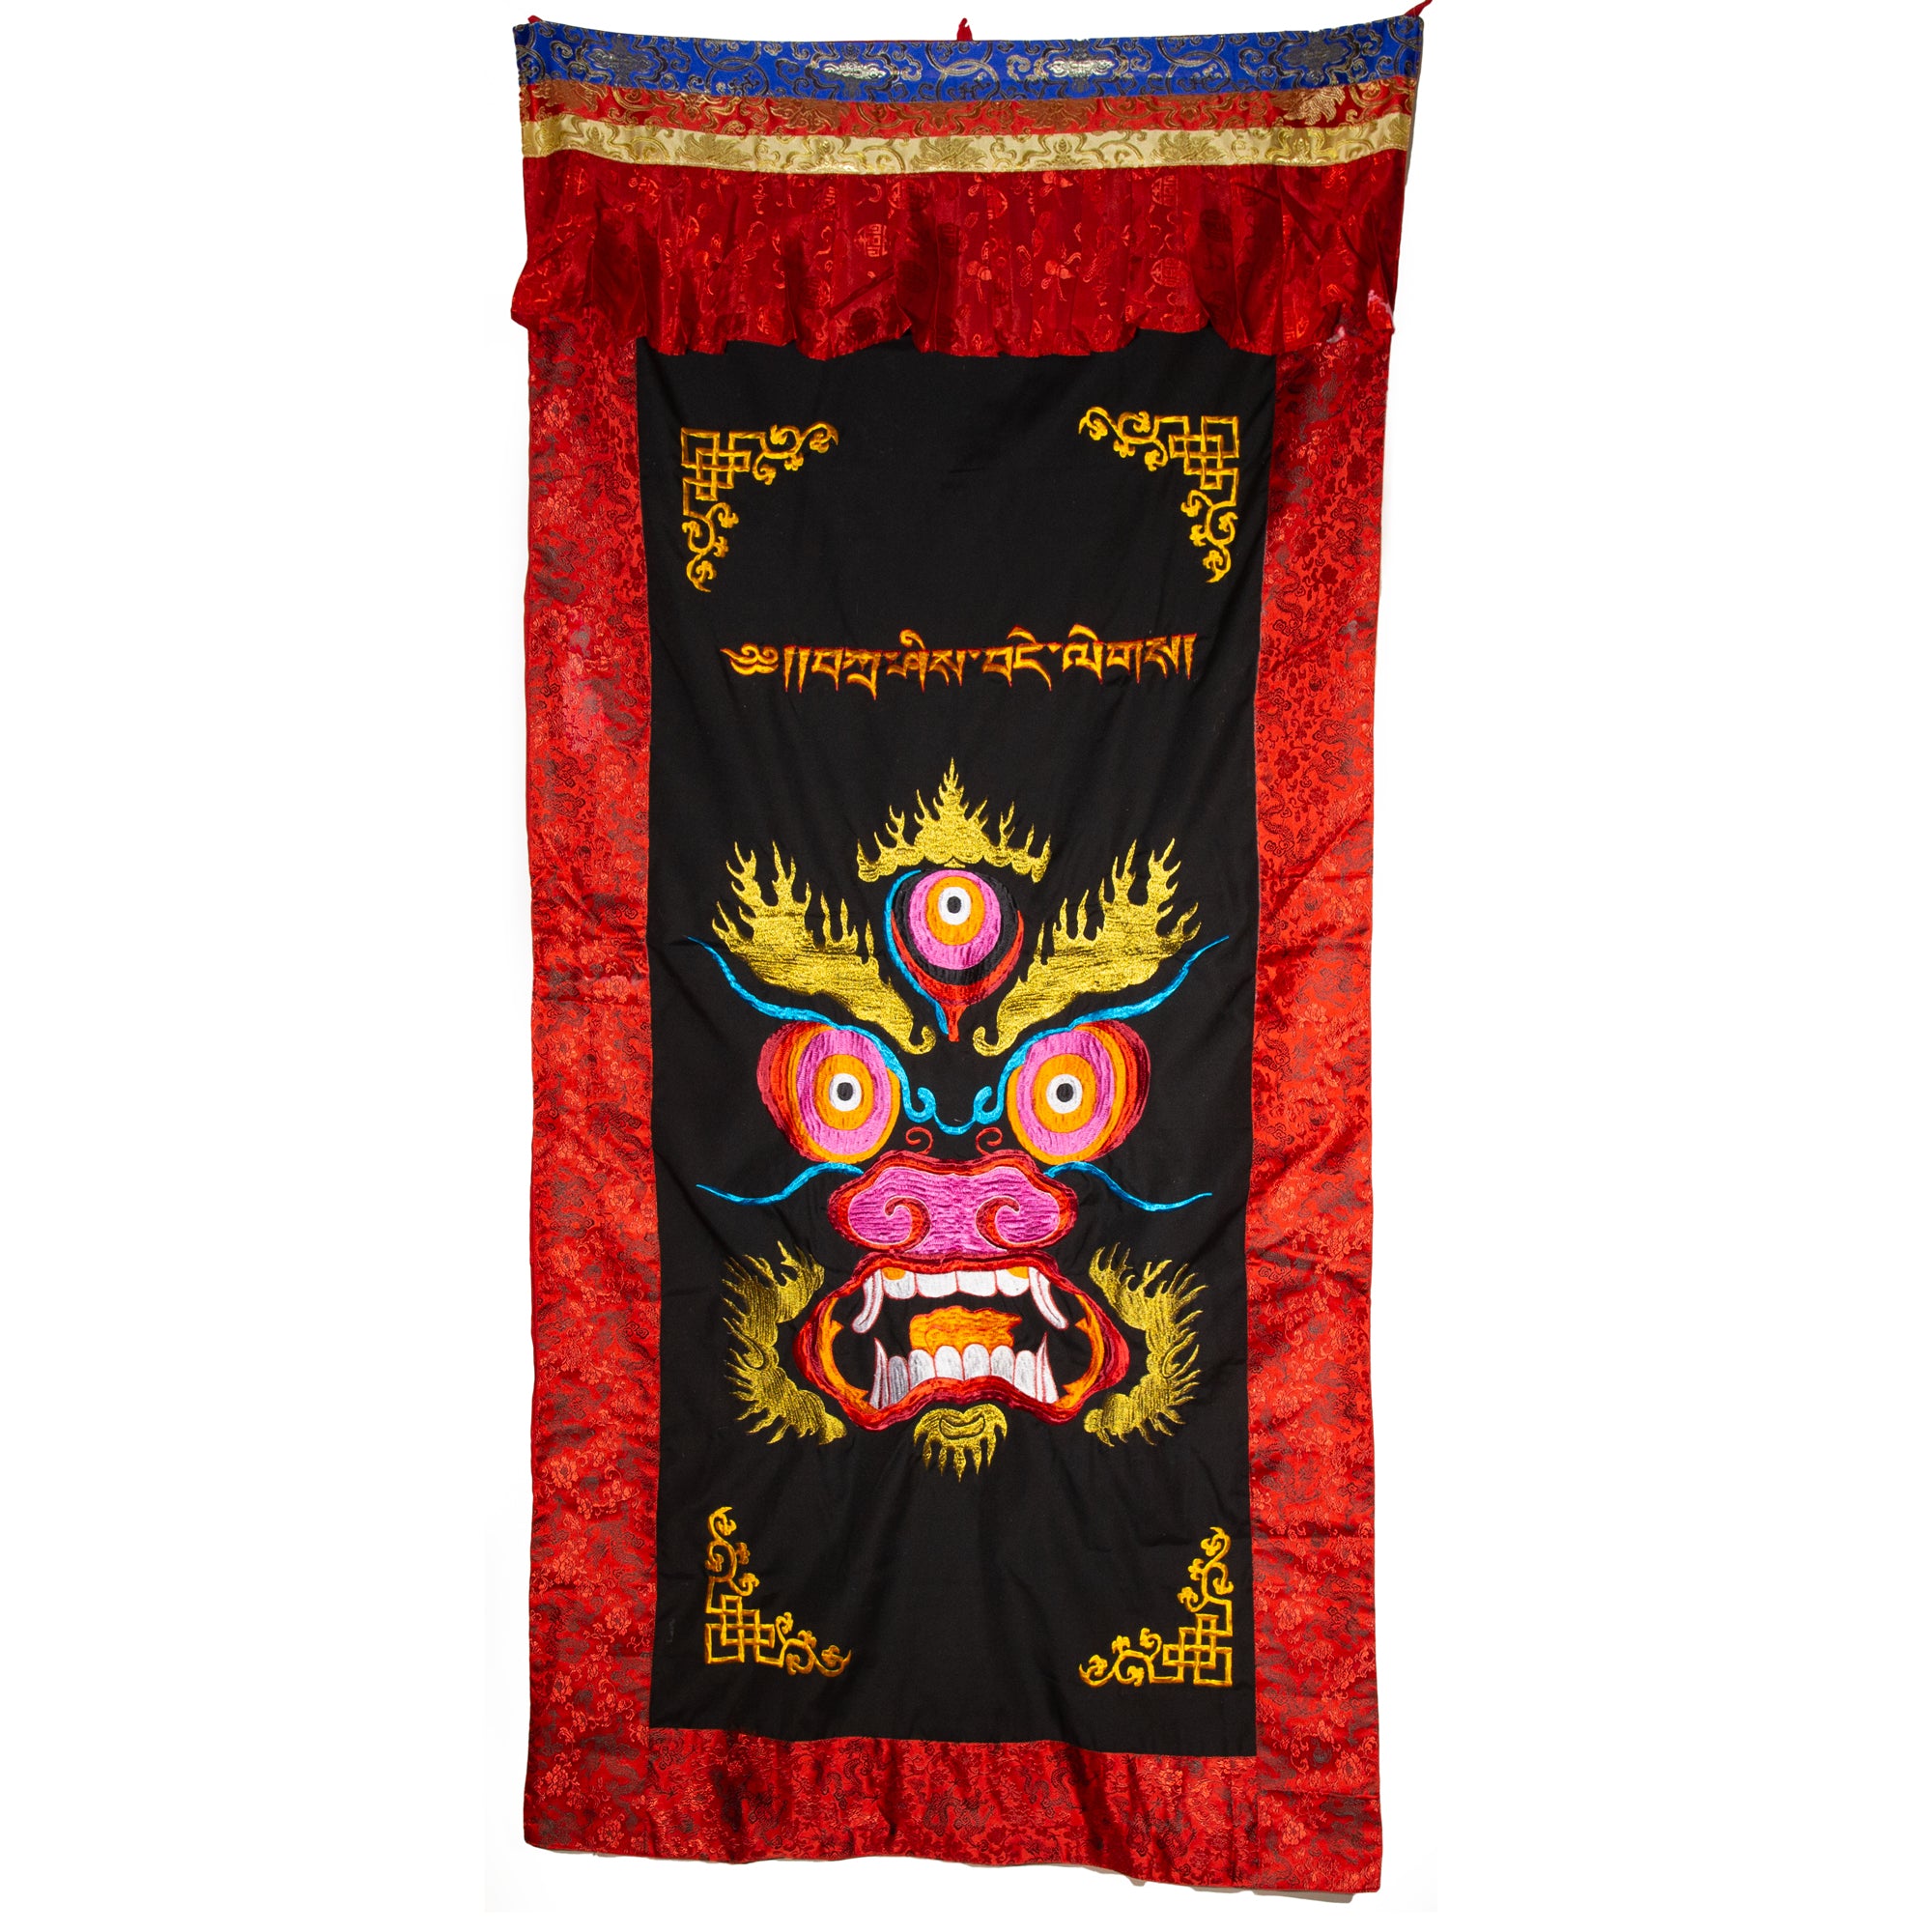 Single-faced Embroidered Wrathful Door Curtain